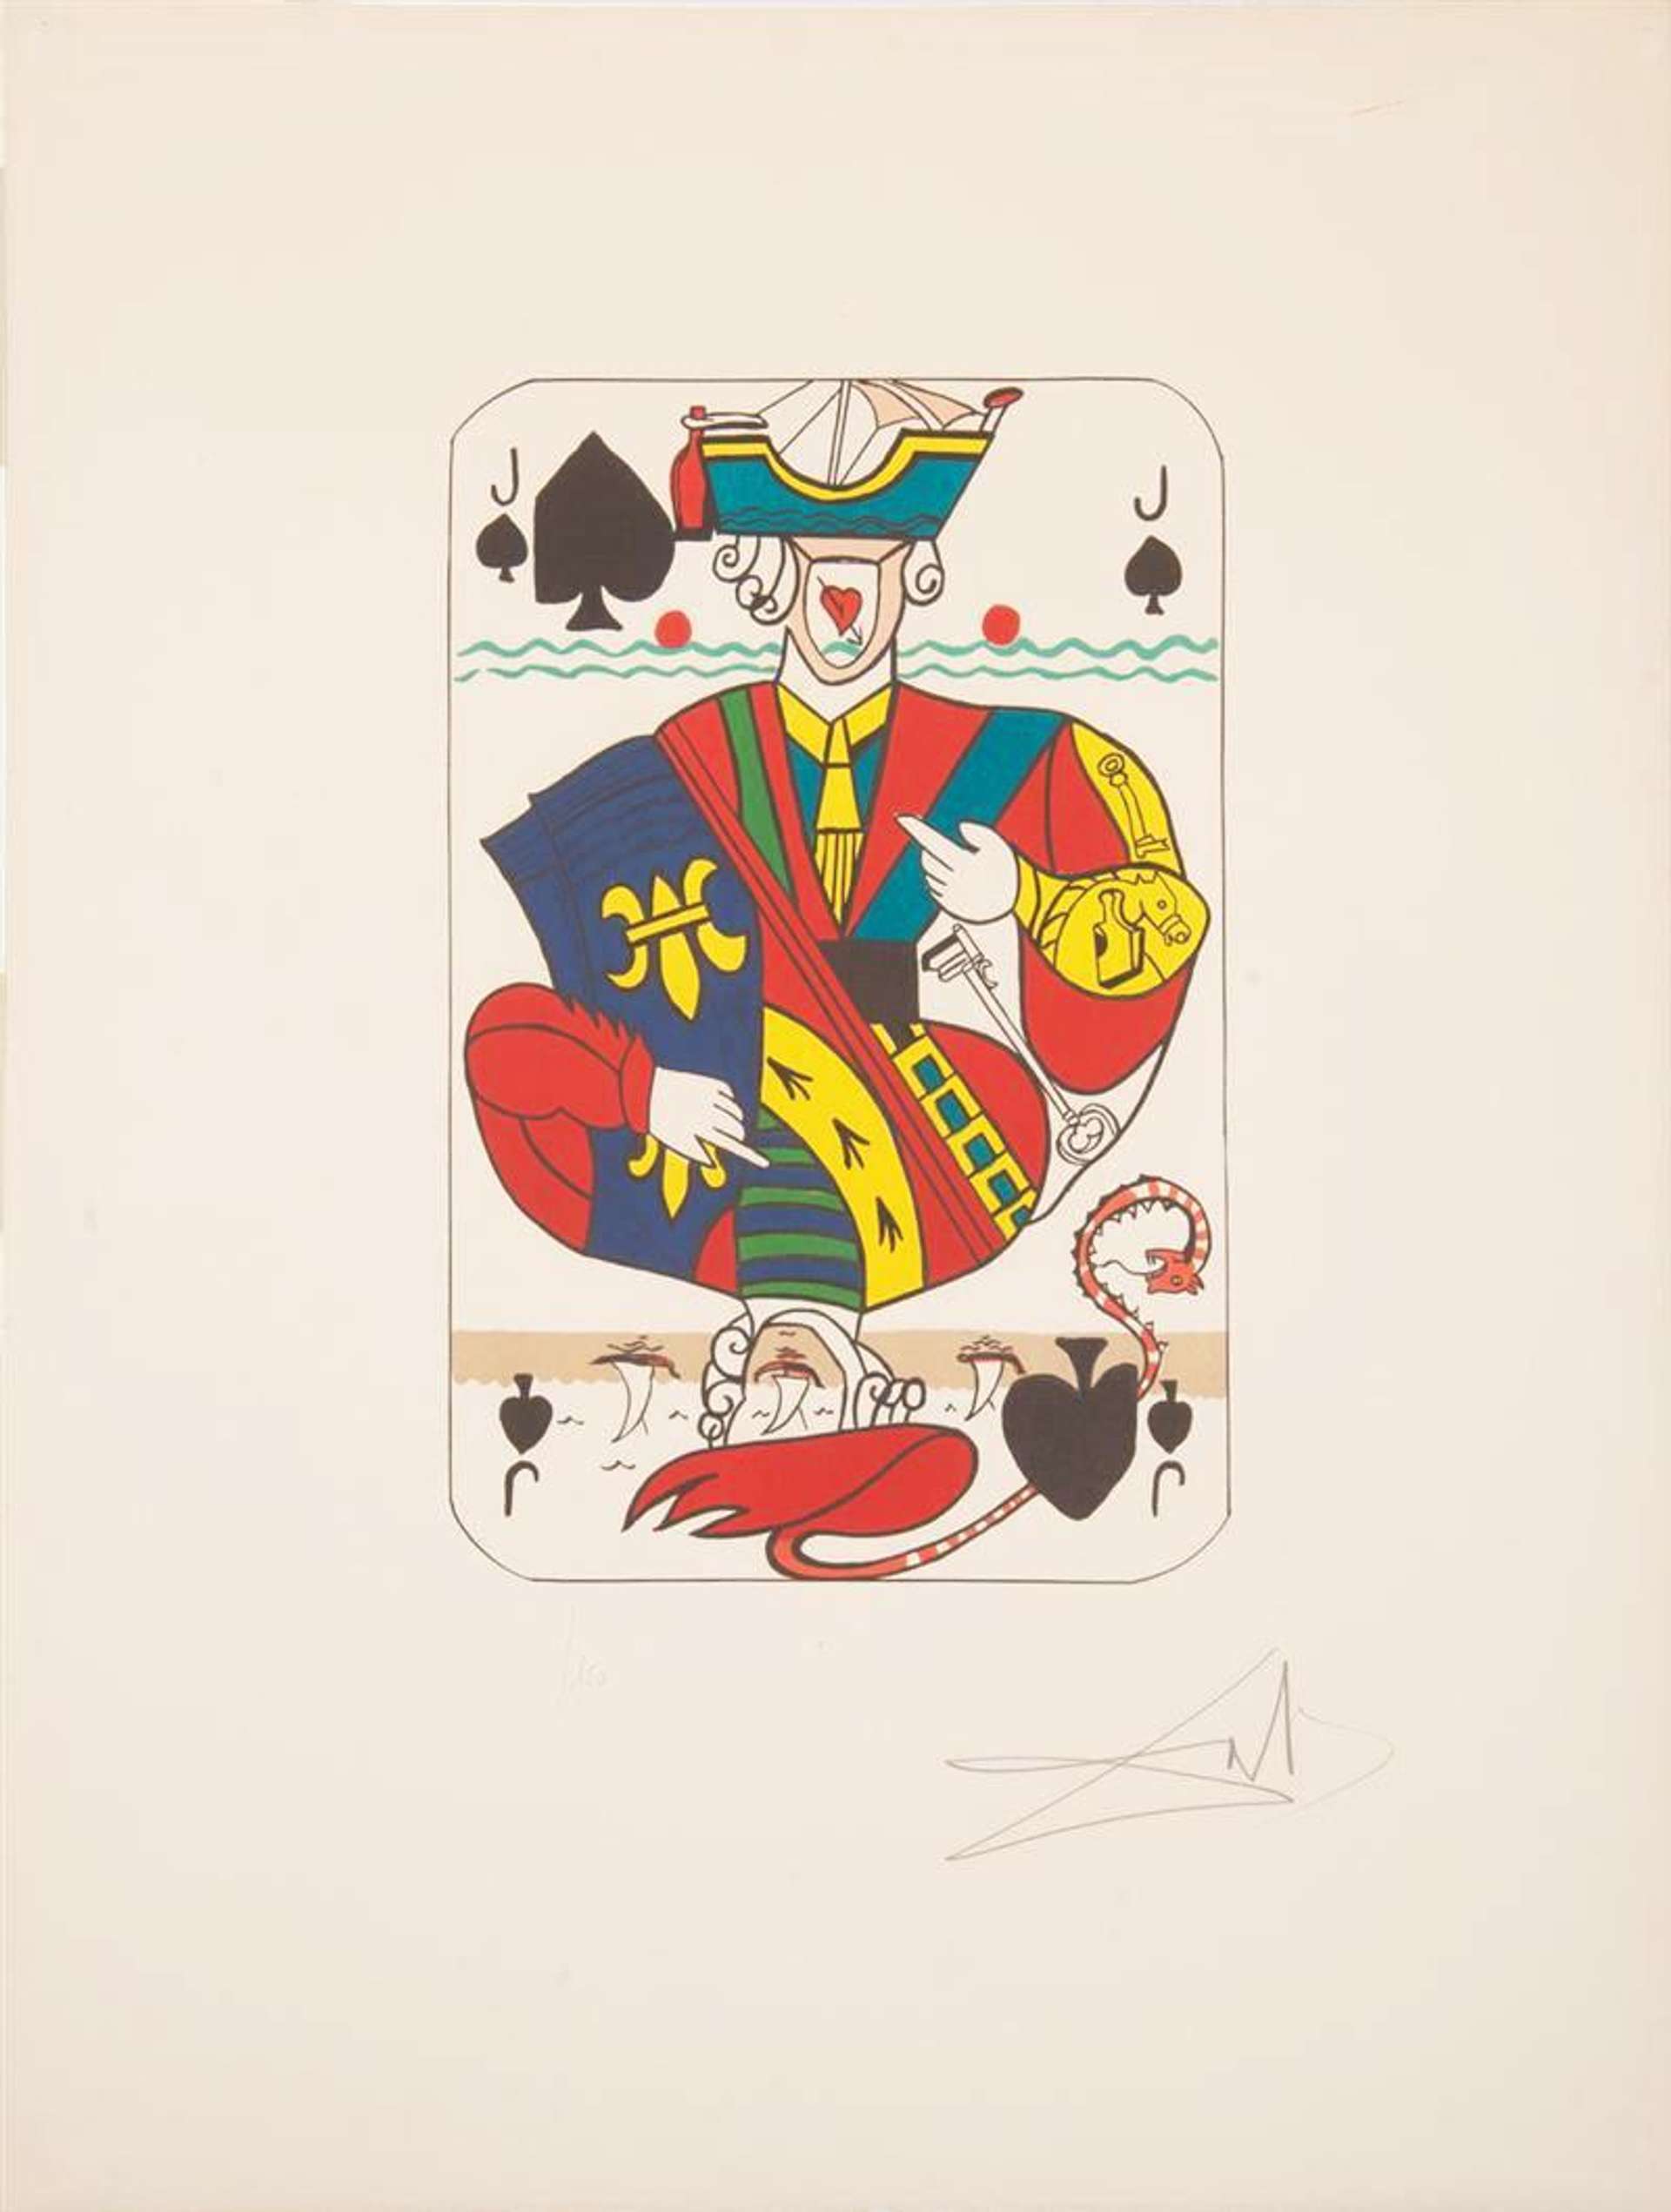 A drawing of a traditional playing card featuring the the Jack of Spades, with elements of nautical imagery such as a ship, a boat, and a seahorse.